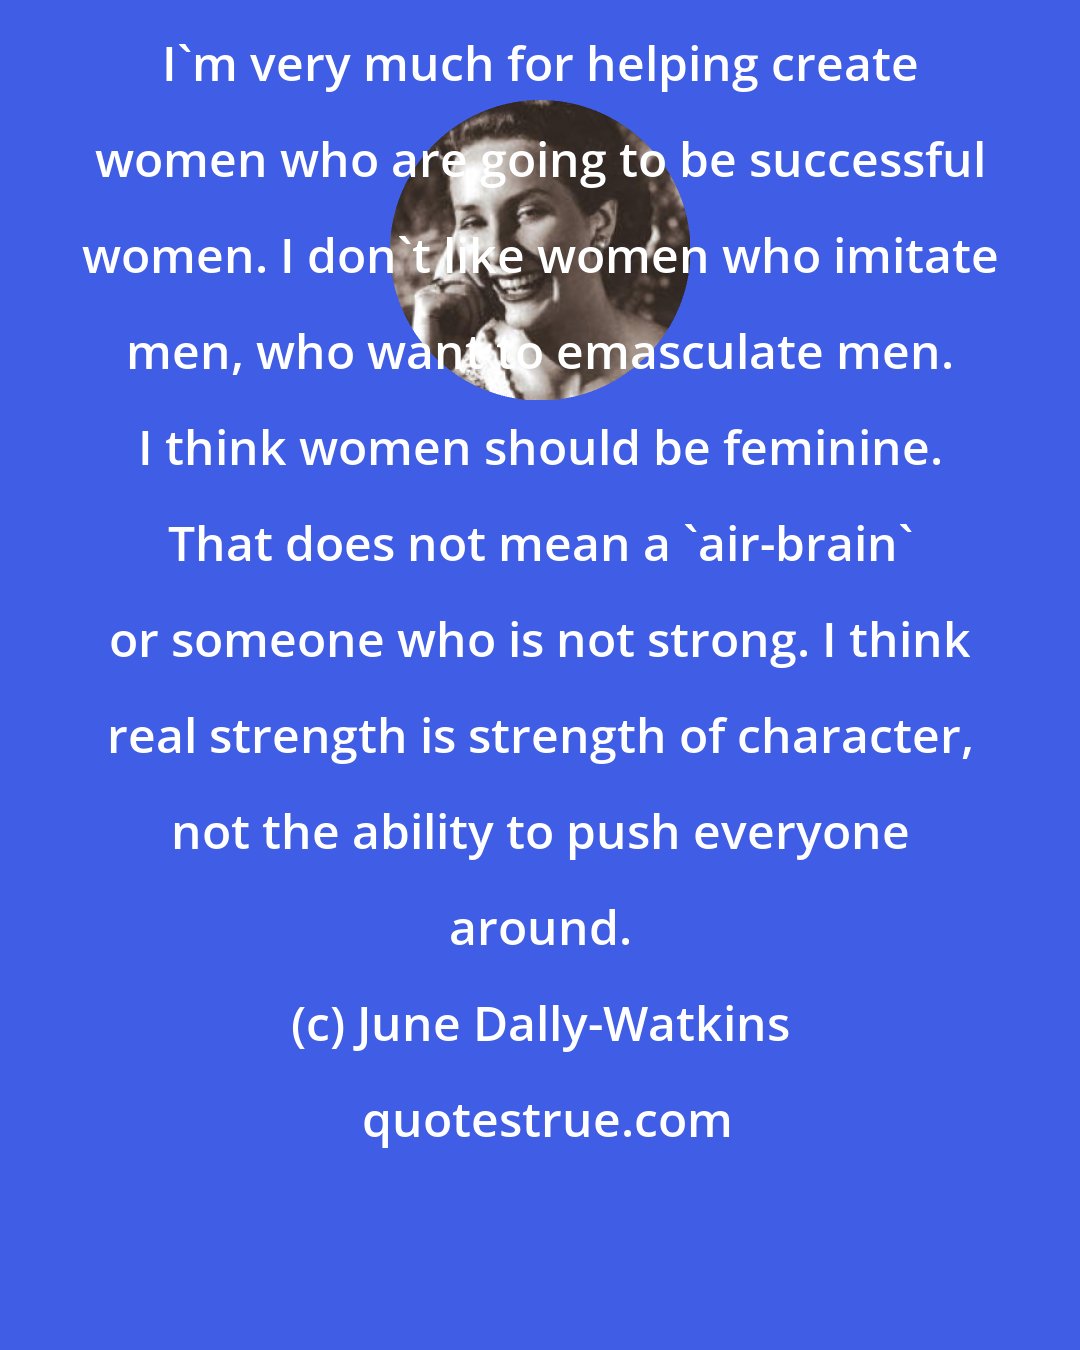 June Dally-Watkins: I'm very much for helping create women who are going to be successful women. I don't like women who imitate men, who want to emasculate men. I think women should be feminine. That does not mean a 'air-brain' or someone who is not strong. I think real strength is strength of character, not the ability to push everyone around.